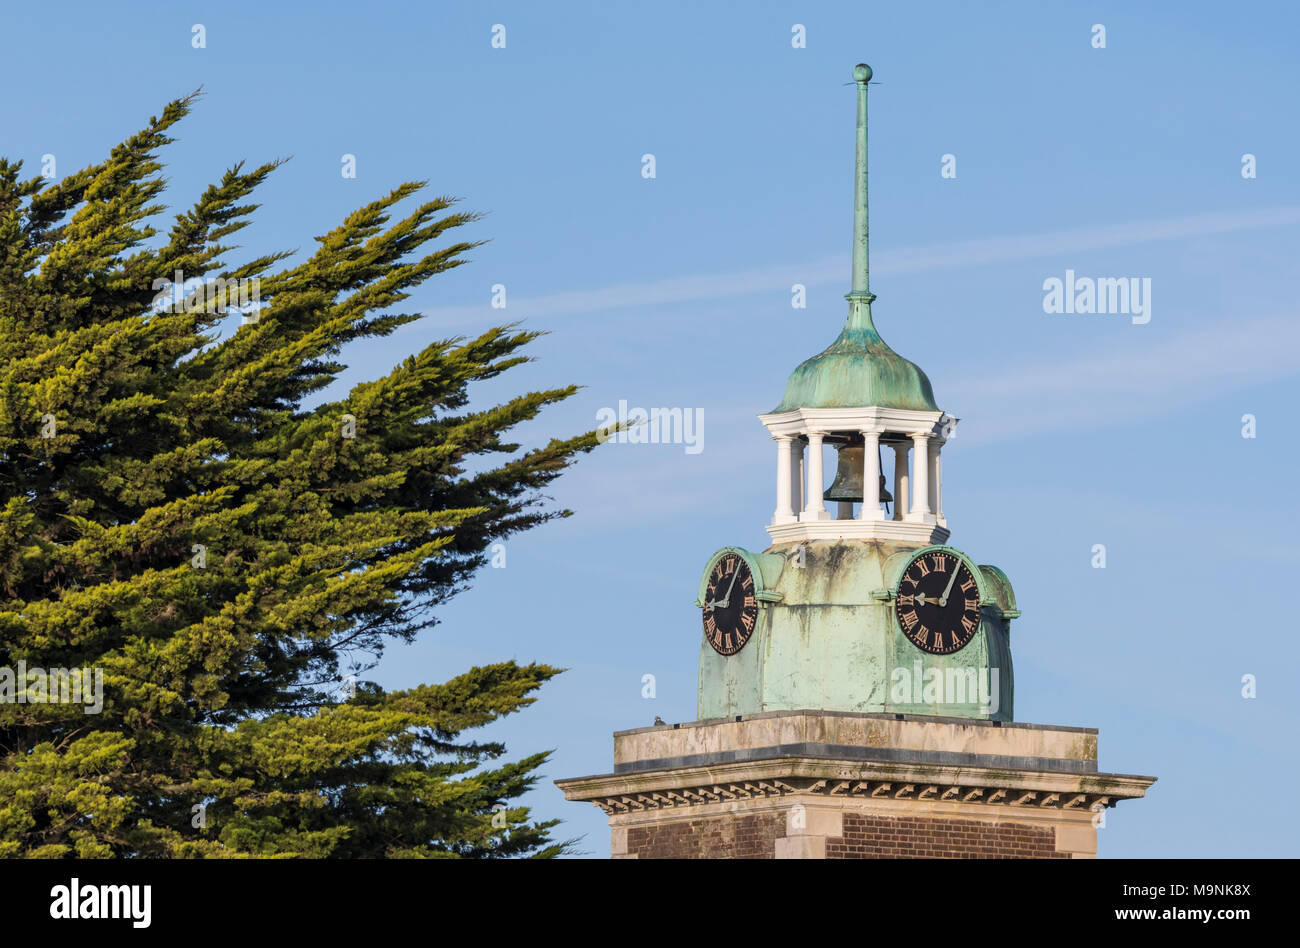 Clock tower and bell tower of a British Victorian building. Located over the Rustington Convalescent Home in Rustington, West Sussex, England, UK. Stock Photo